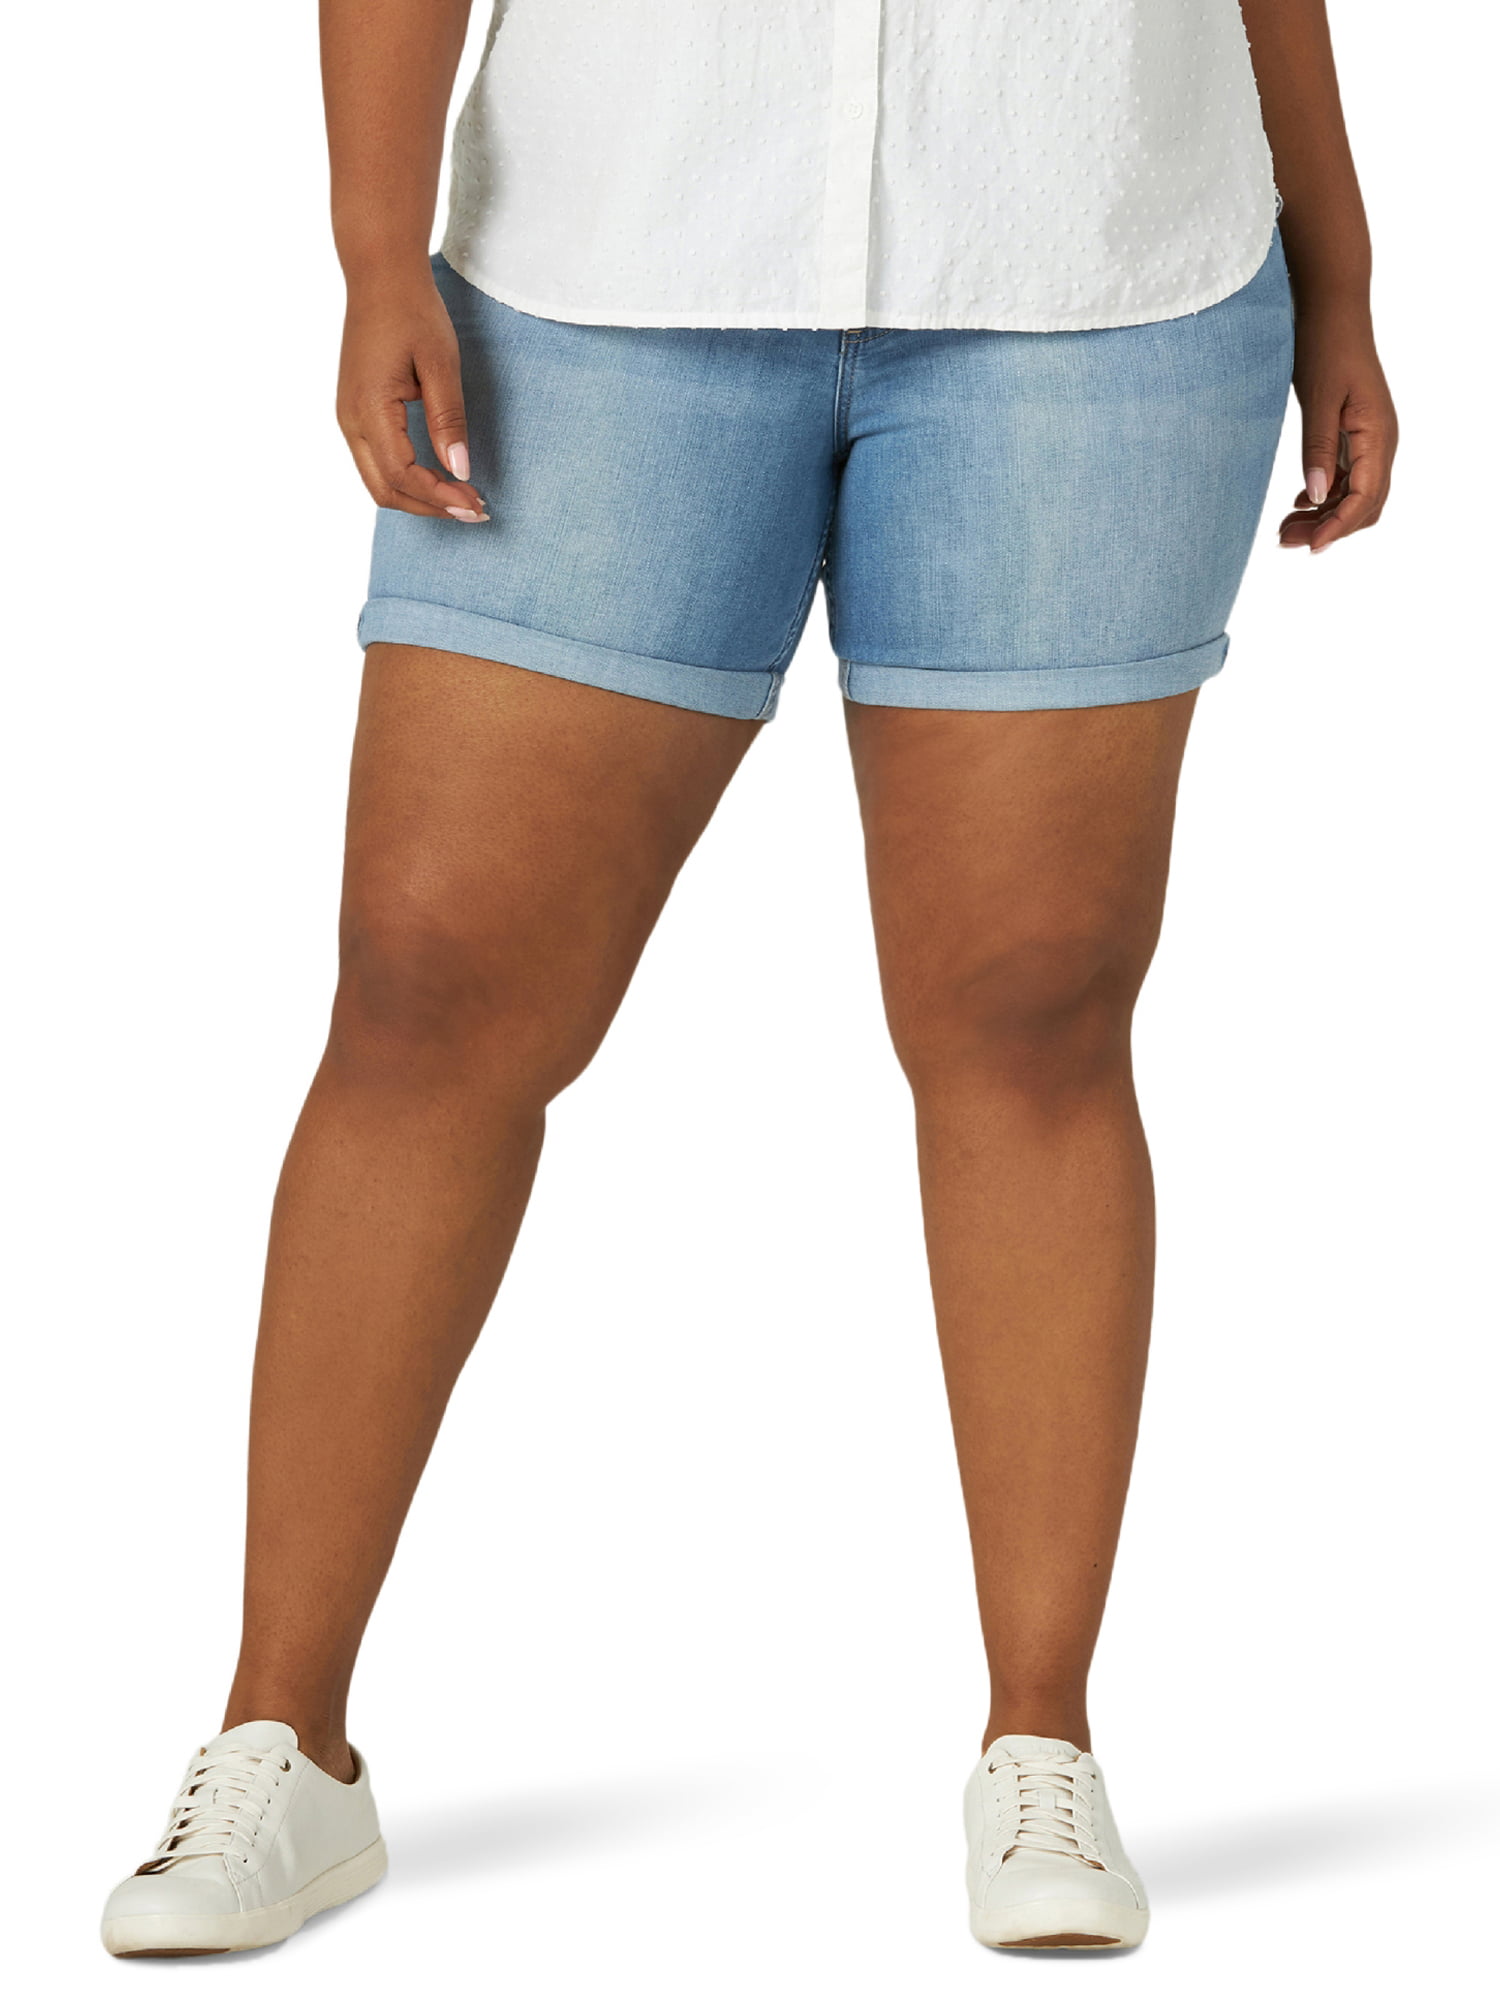 LEE Womens Plus Size Relaxed Fit Kaylin Knit Waist Short